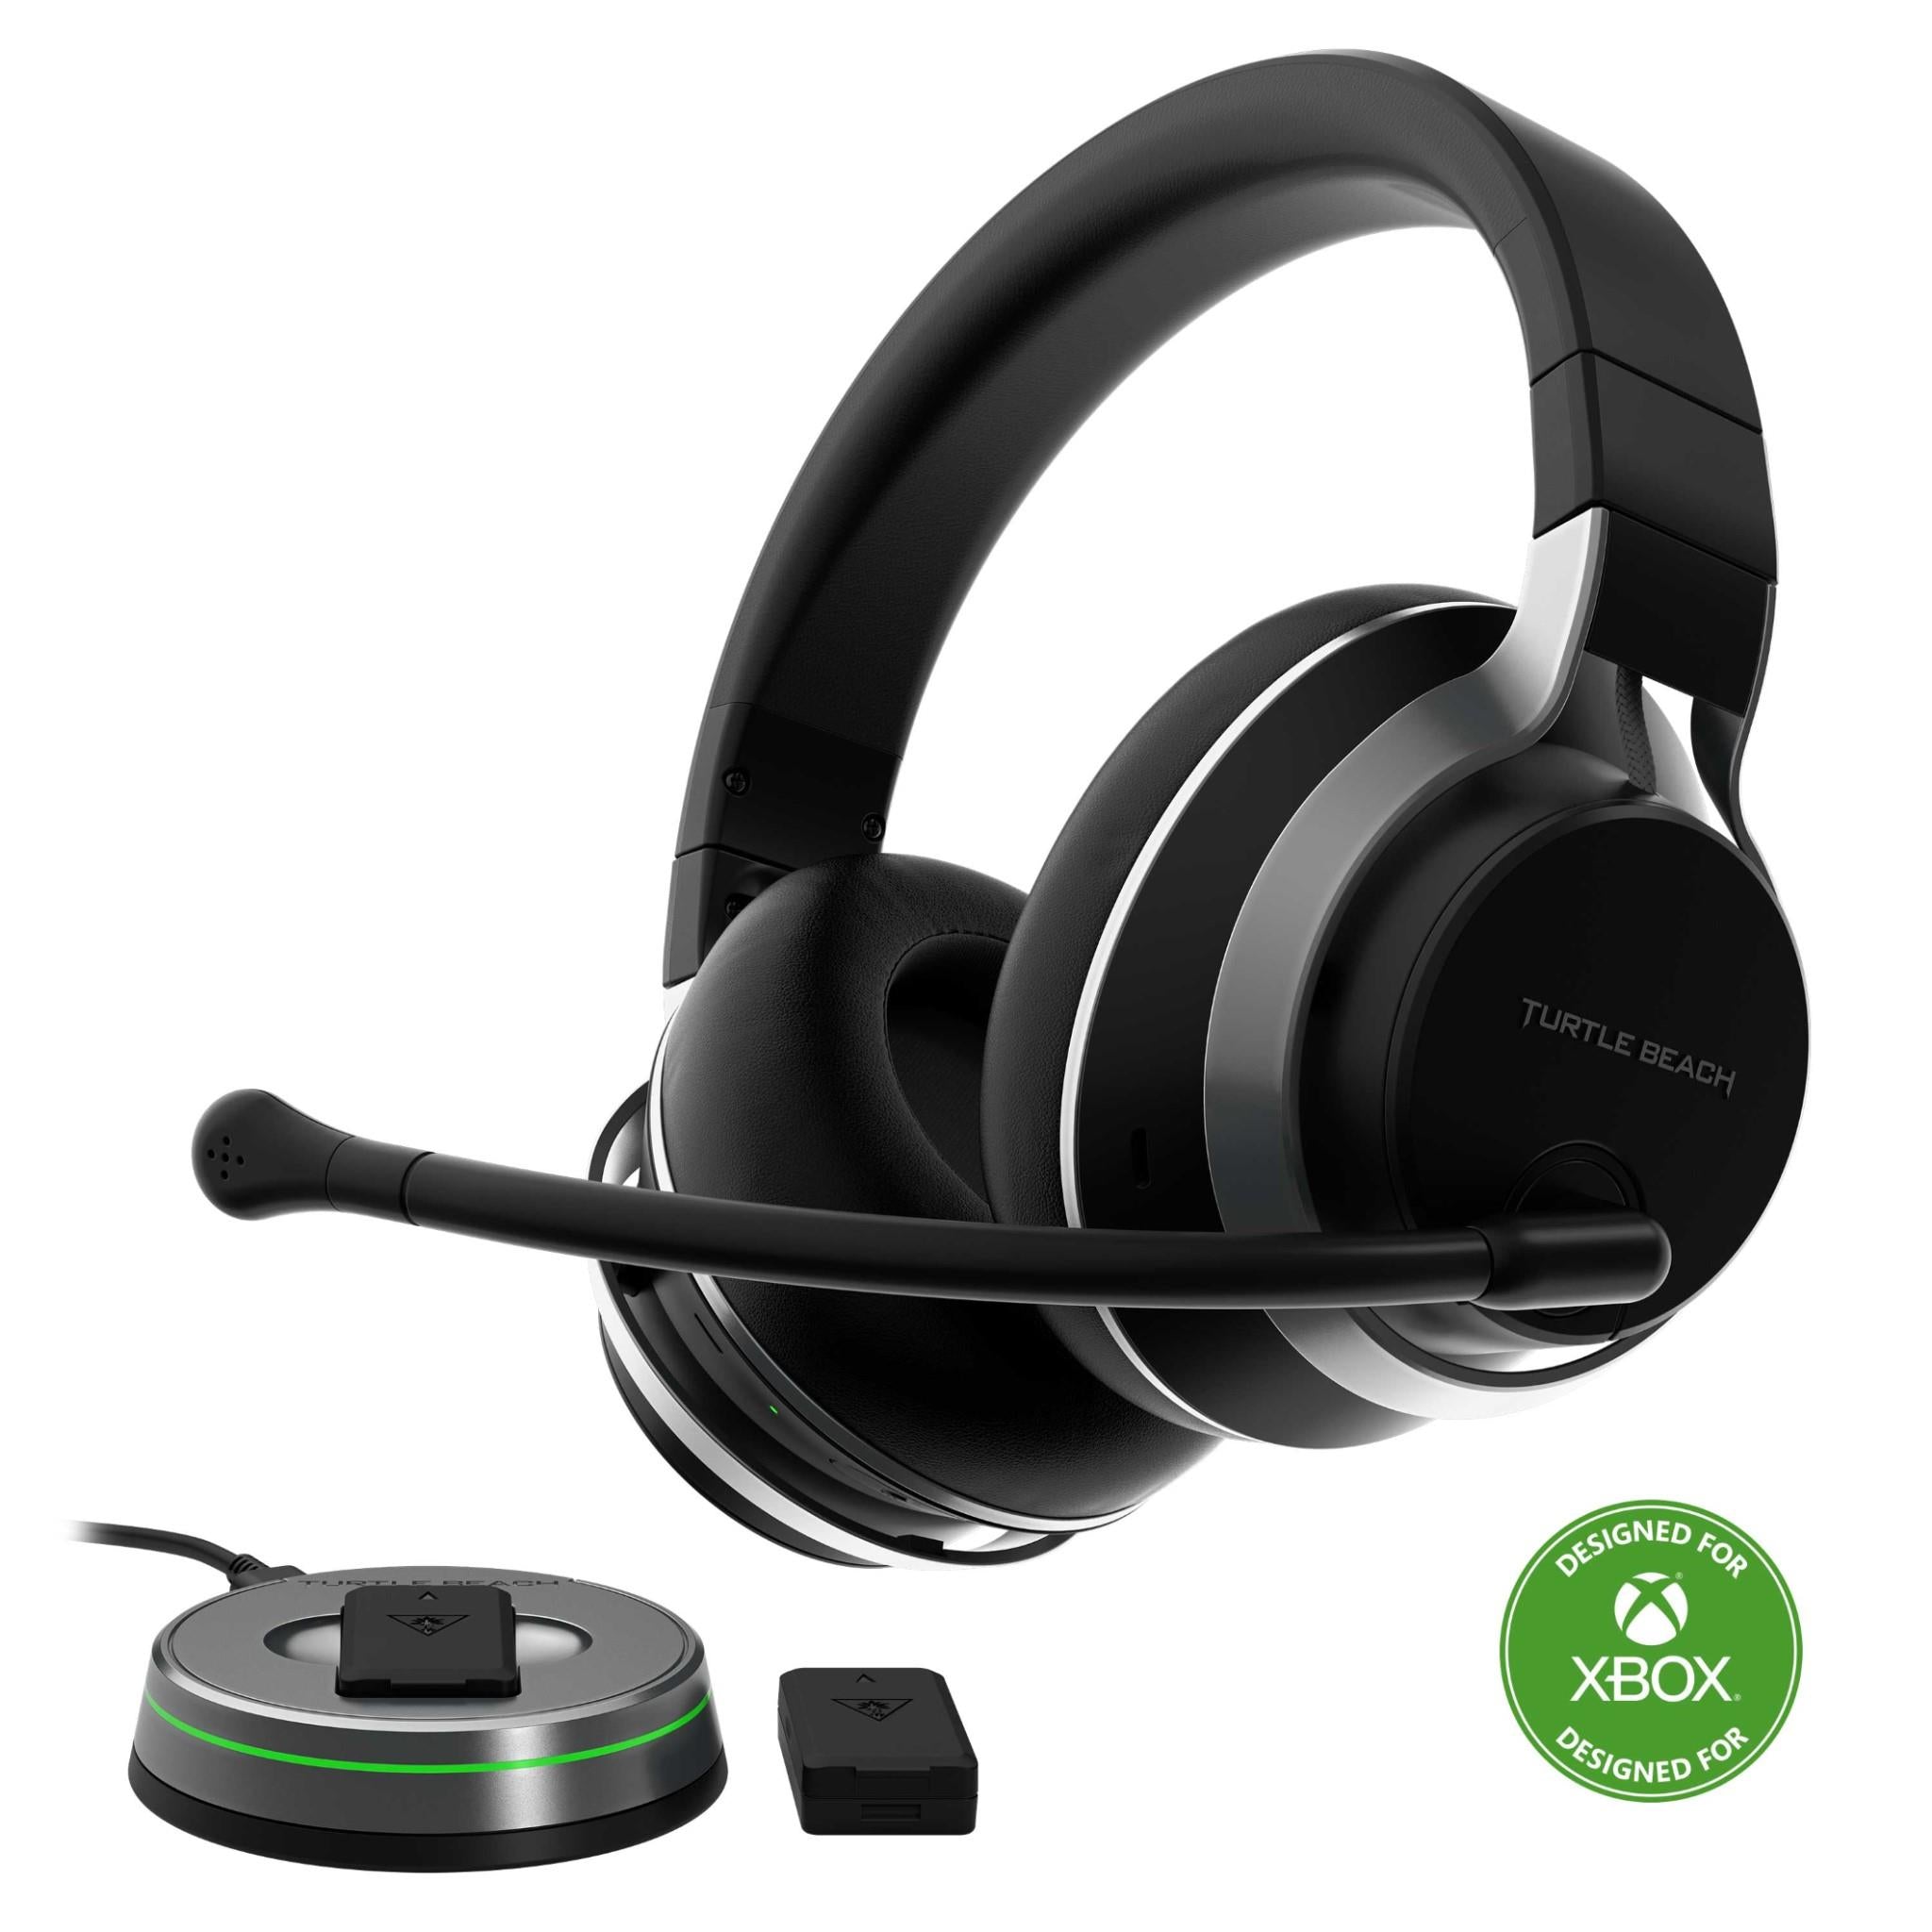 turtle beach stealth pro multiplatform wireless noise-cancelling gaming headset for xbox (black)